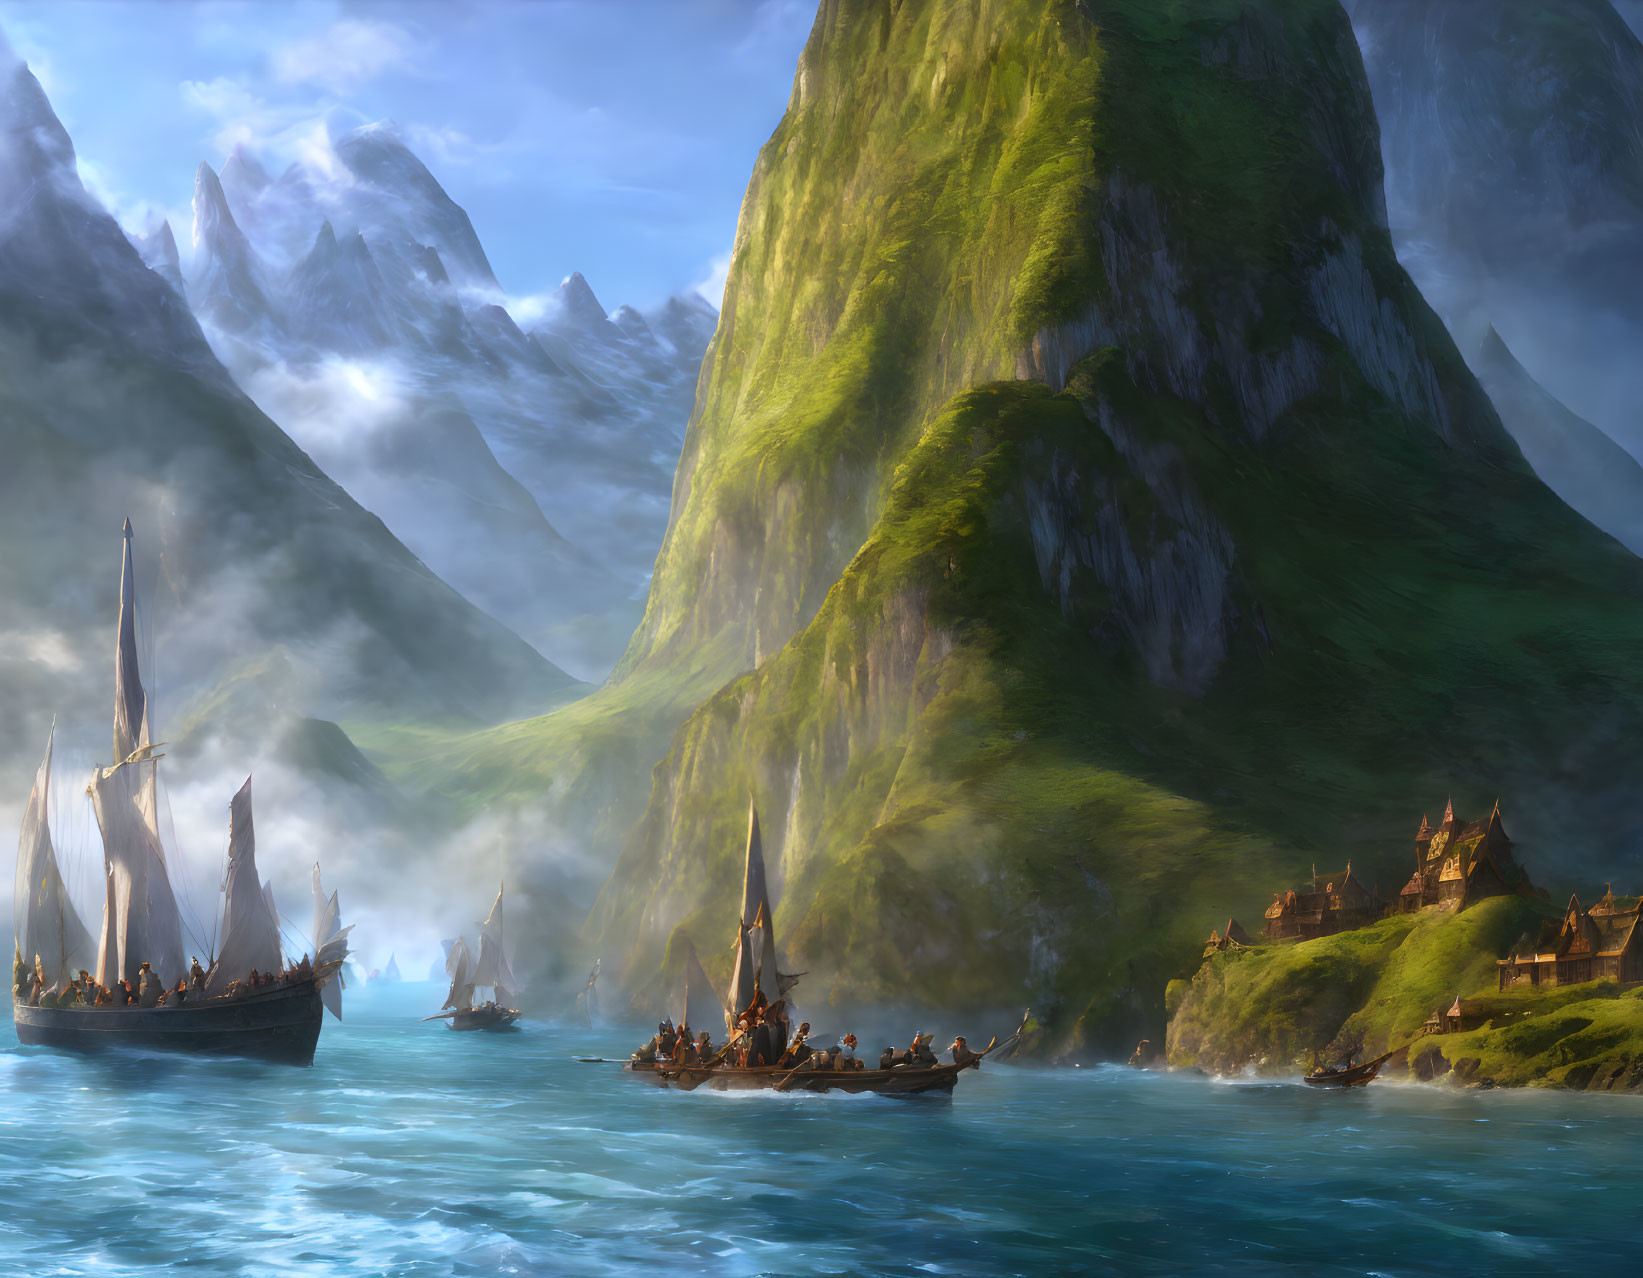 Scenic bay with Viking-like ships, green cliffs, misty mountains, and coastal village.